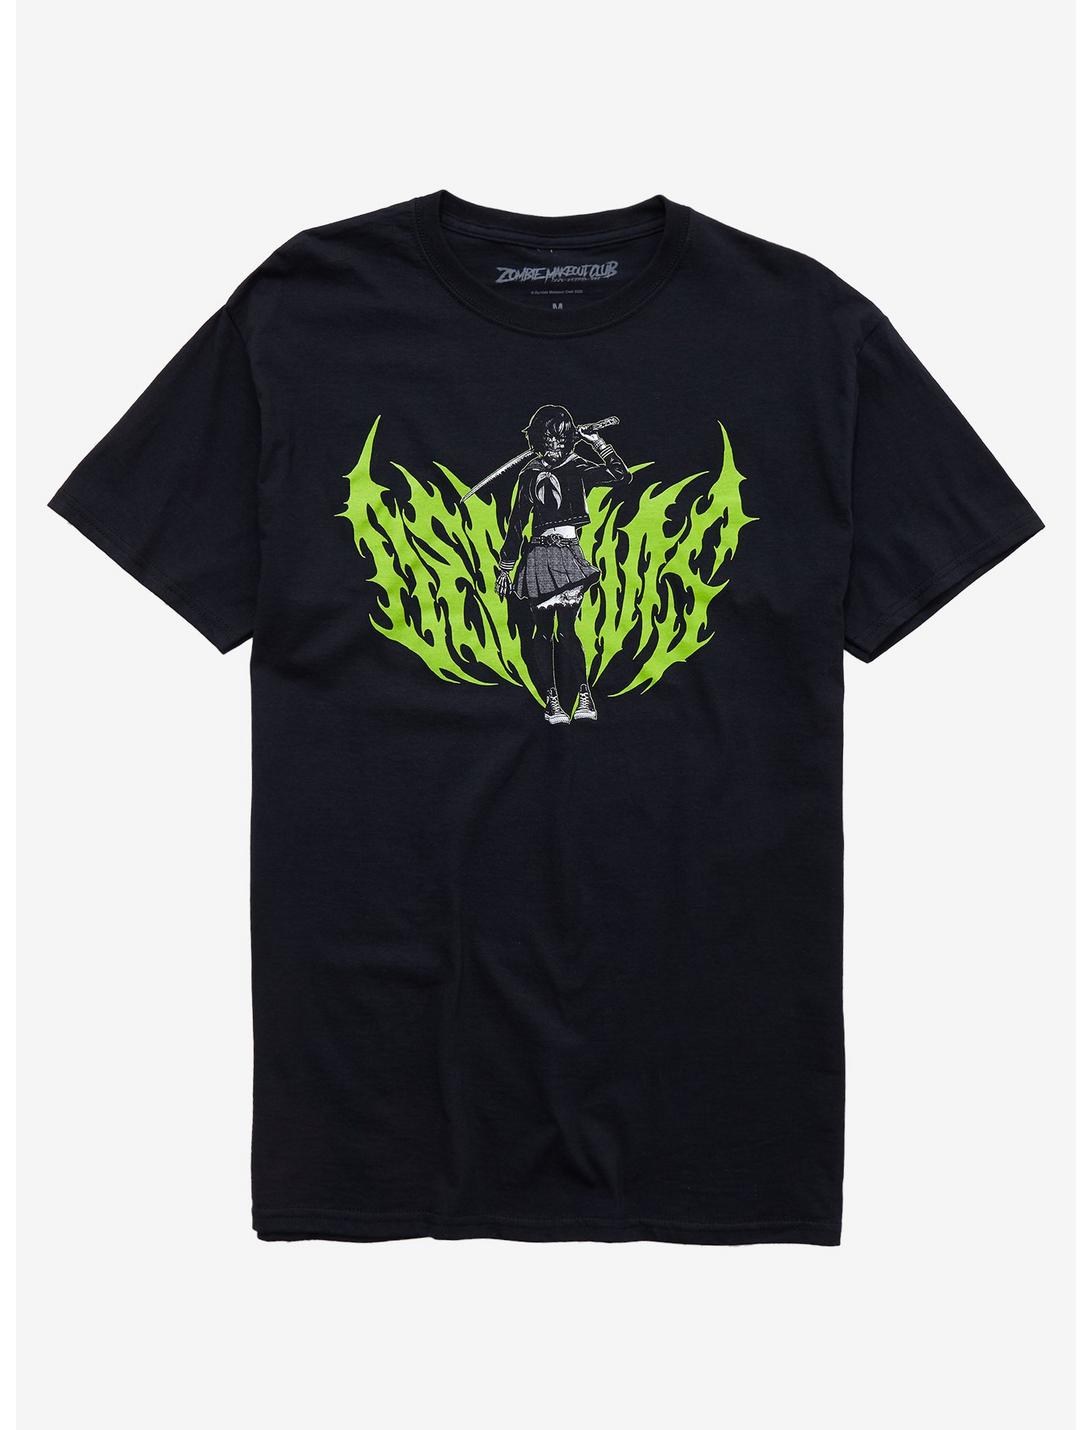 Zombie Makeout Club Demons T-Shirt, NEON GREEN, hi-res